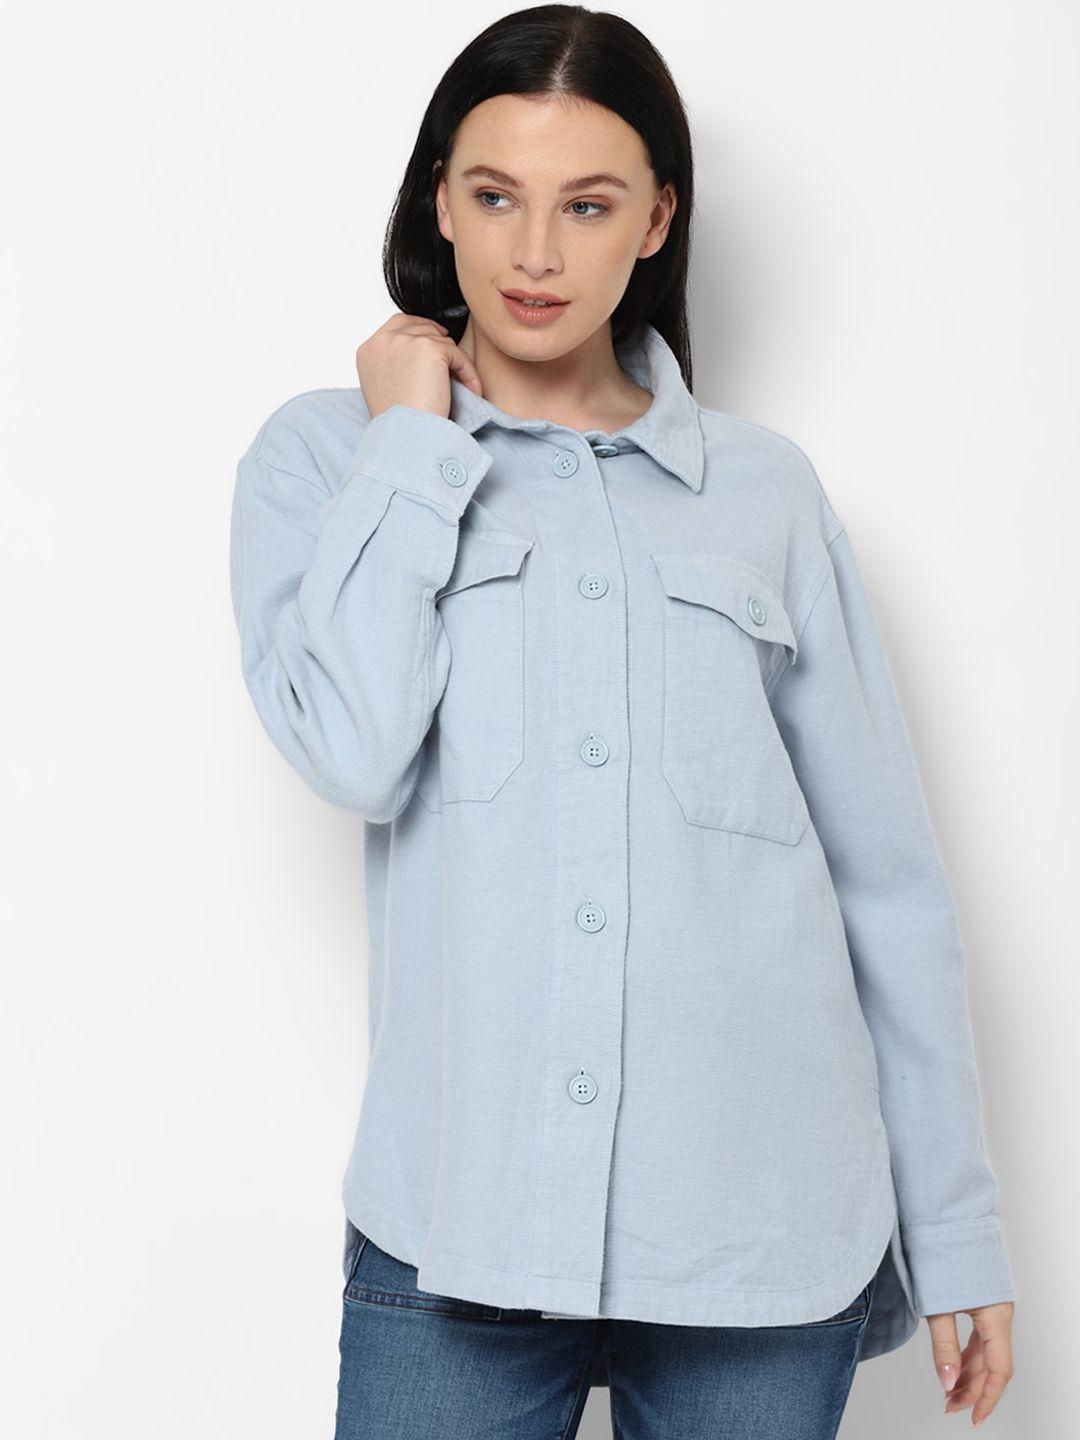 american-eagle-outfitters-women-blue-slim-fit-casual-shirt